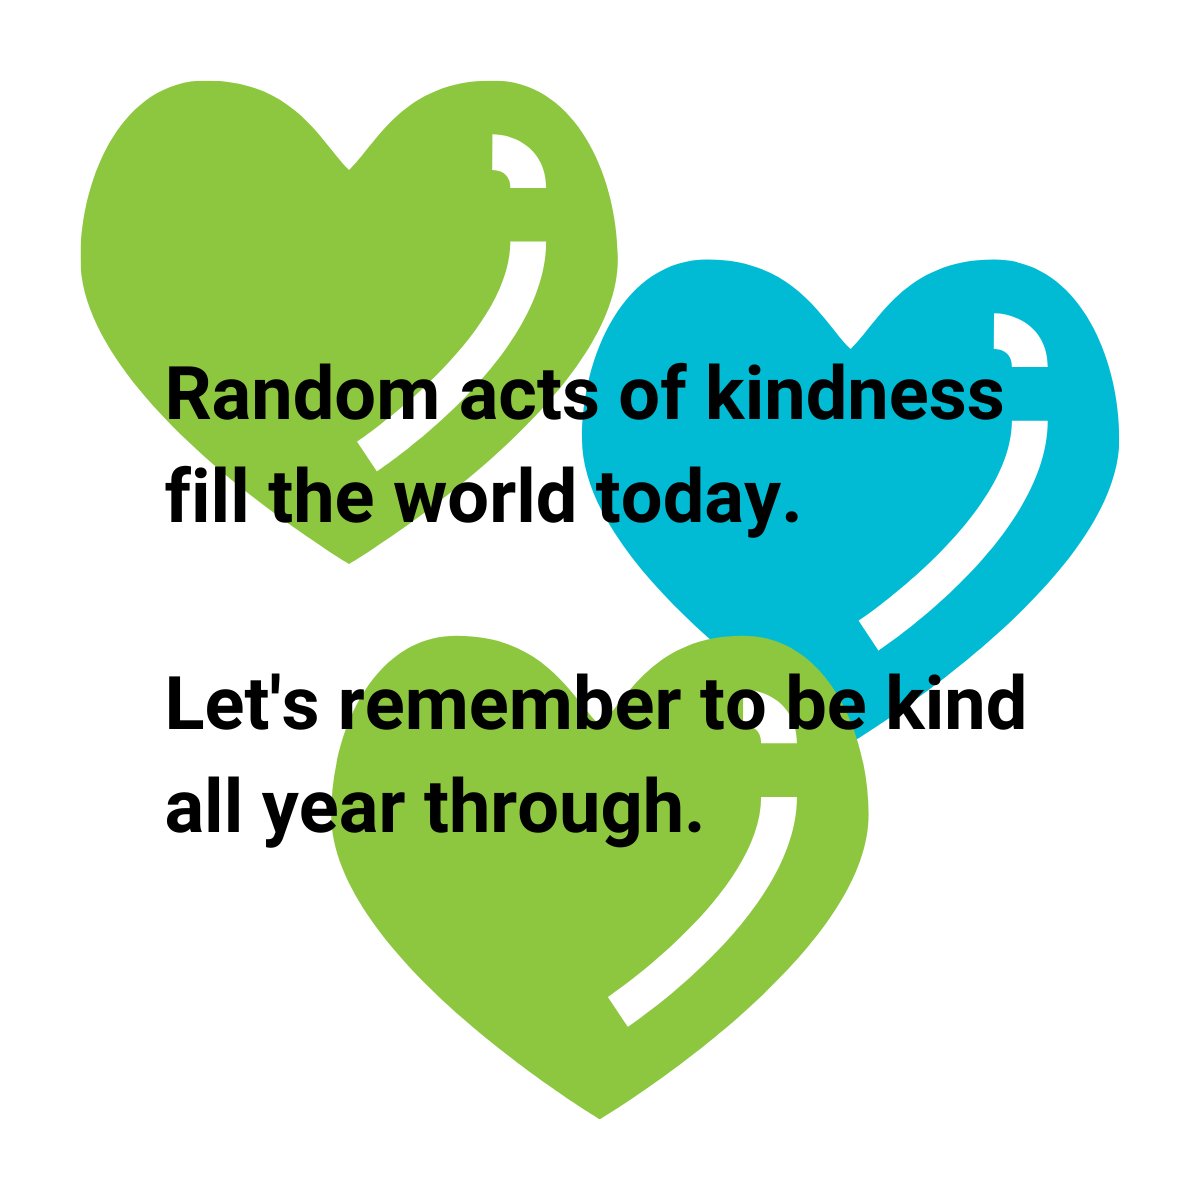 Feb 14-20 is #RandomActsOfKindnessWeek. Feb17 is #RandomActsOfKindnessDay2021, a good day to share this story about an #AbbotsfordBC teacher whose 'role extends beyond the classroom.'
💚⬇️💚⬇️💚
ow.ly/HGD050DCZDt

#BeKind #ExploreTheGood #MakeKindnessTheNorm #FraserValley